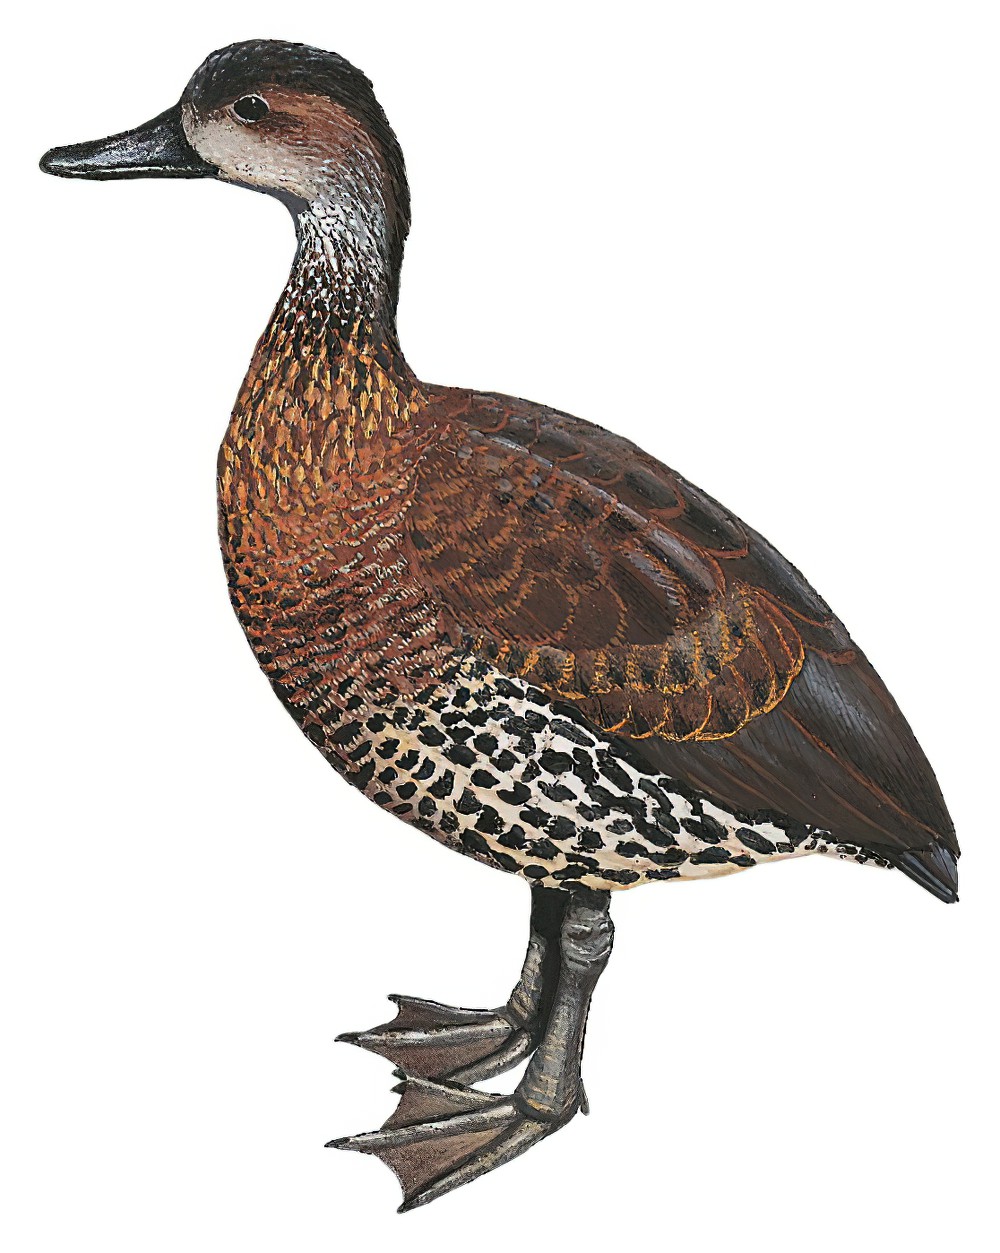 West Indian Whistling-Duck / Dendrocygna arborea